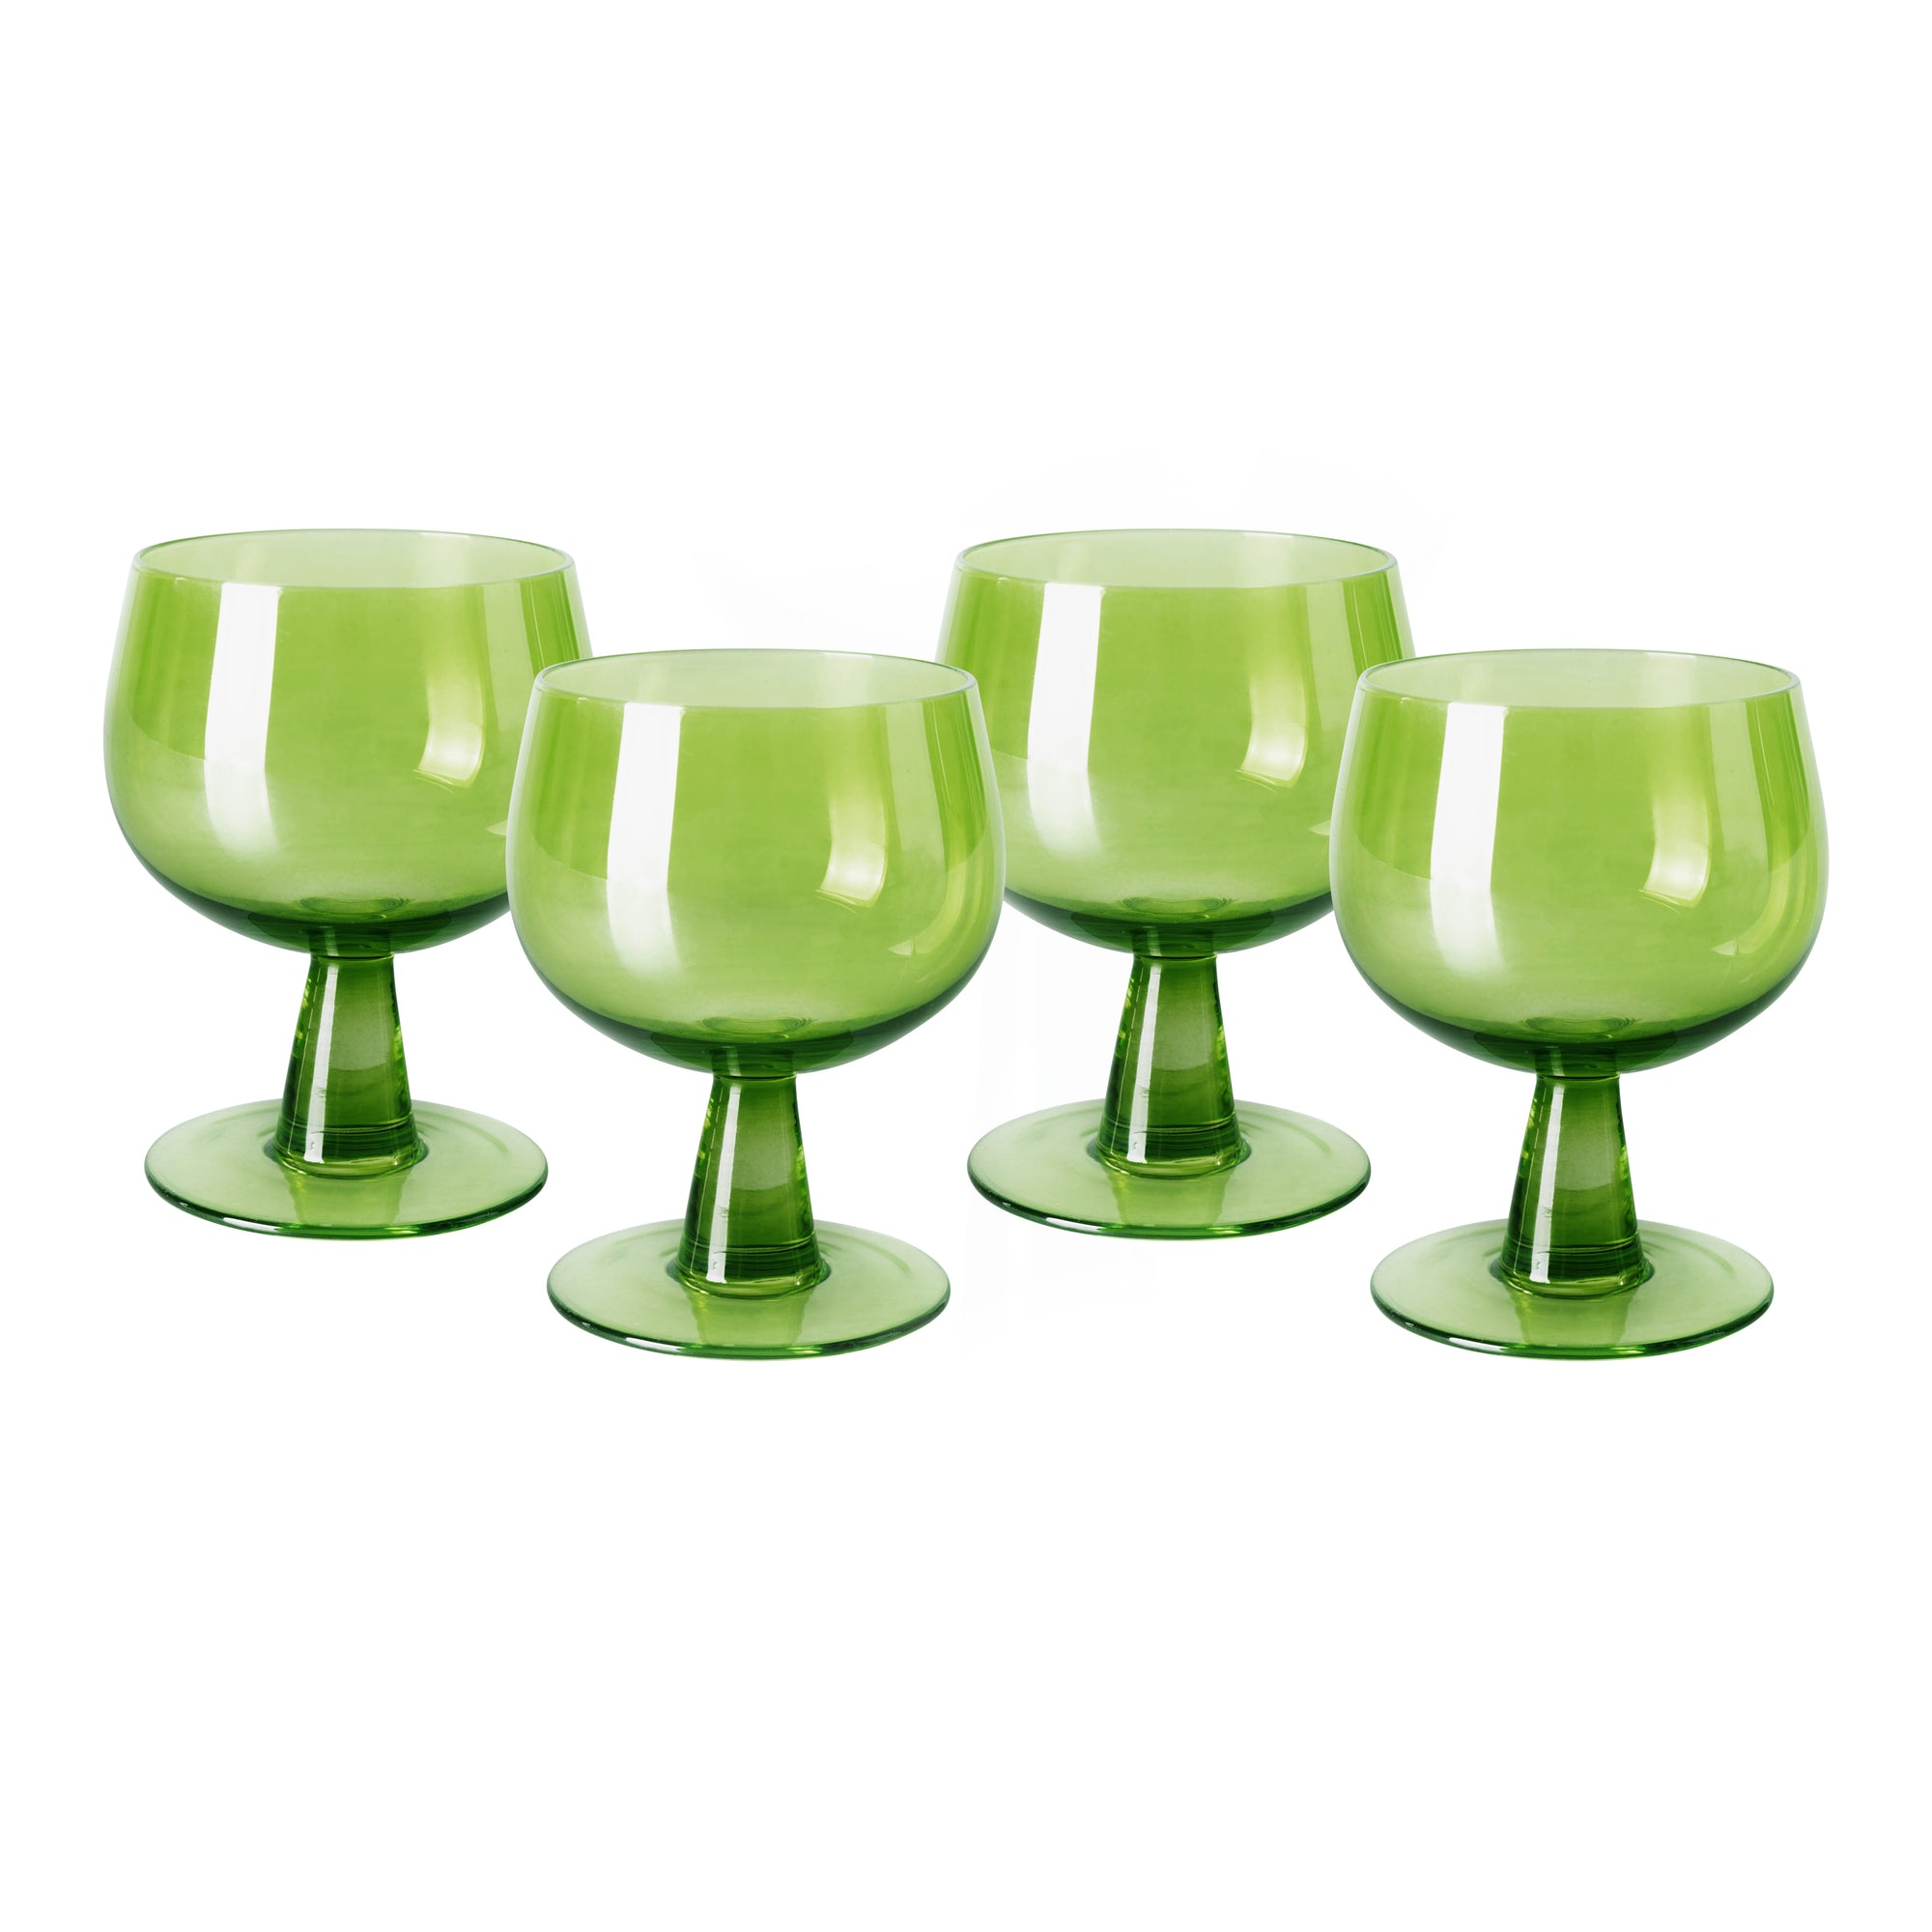 HKLIVING WINE GLASS LOW : LIME GREEN (SET OF 4)